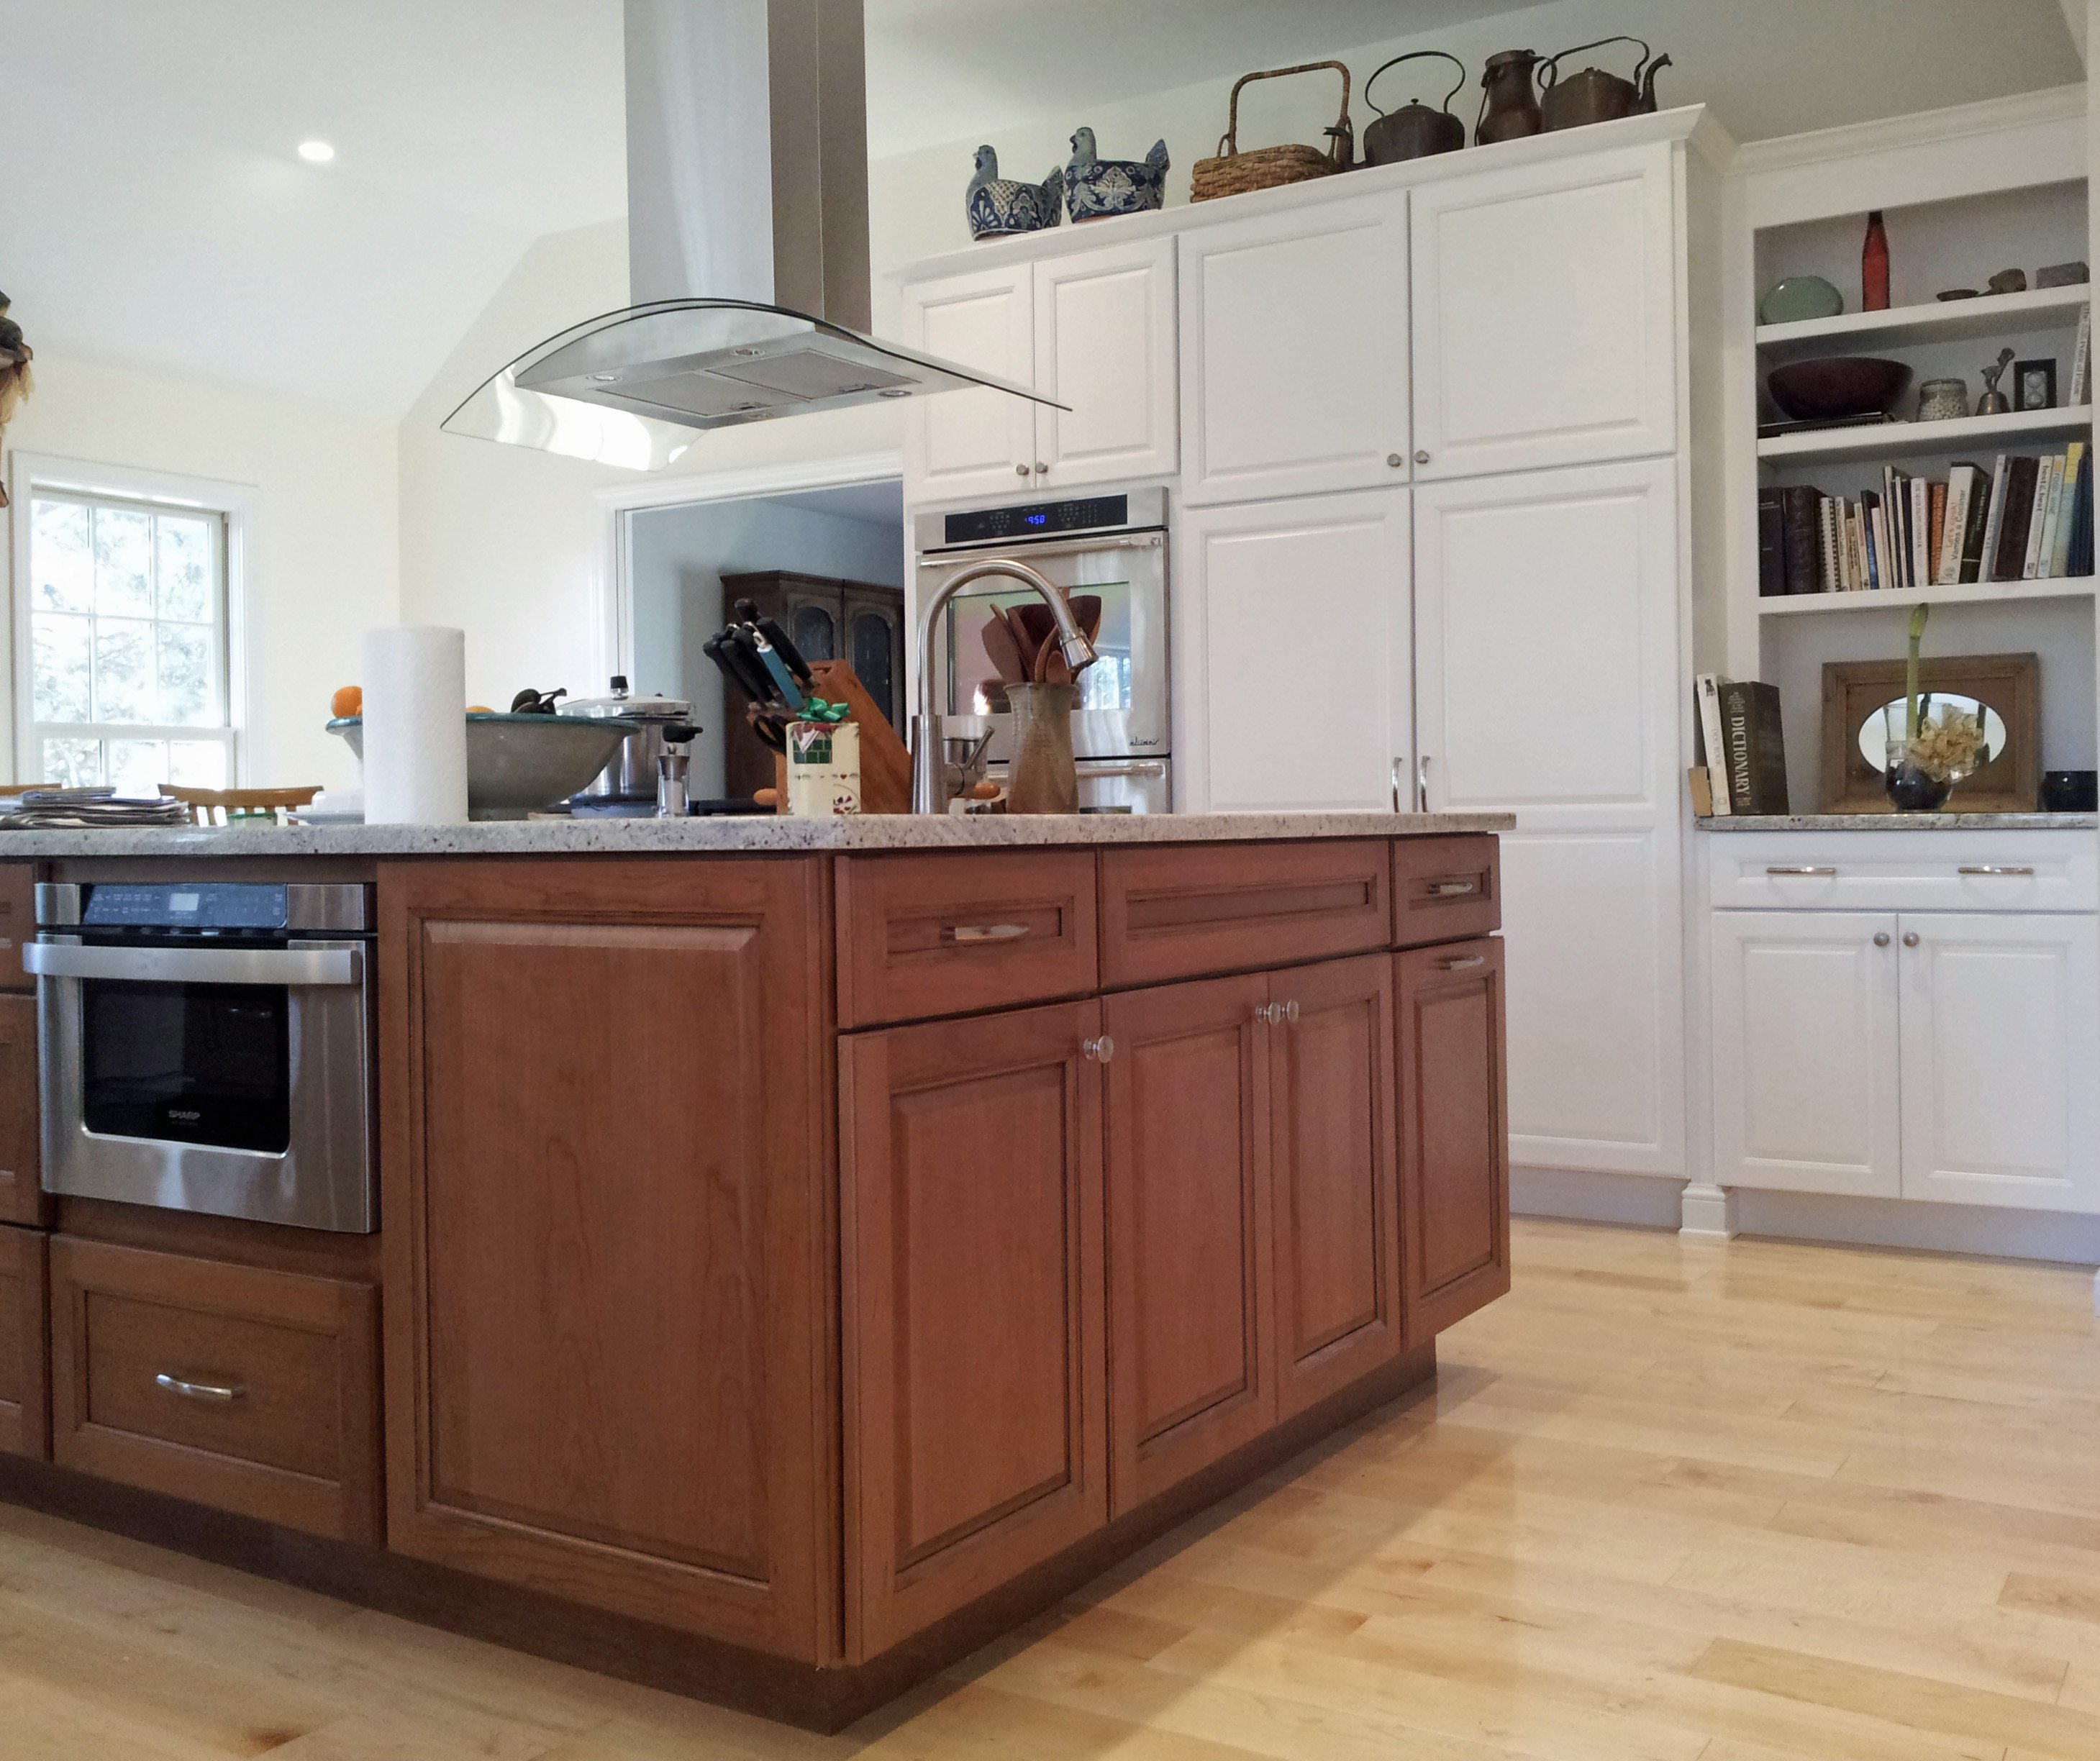  full overlay Island cabinetry mixed with painted perimeter cabinetry